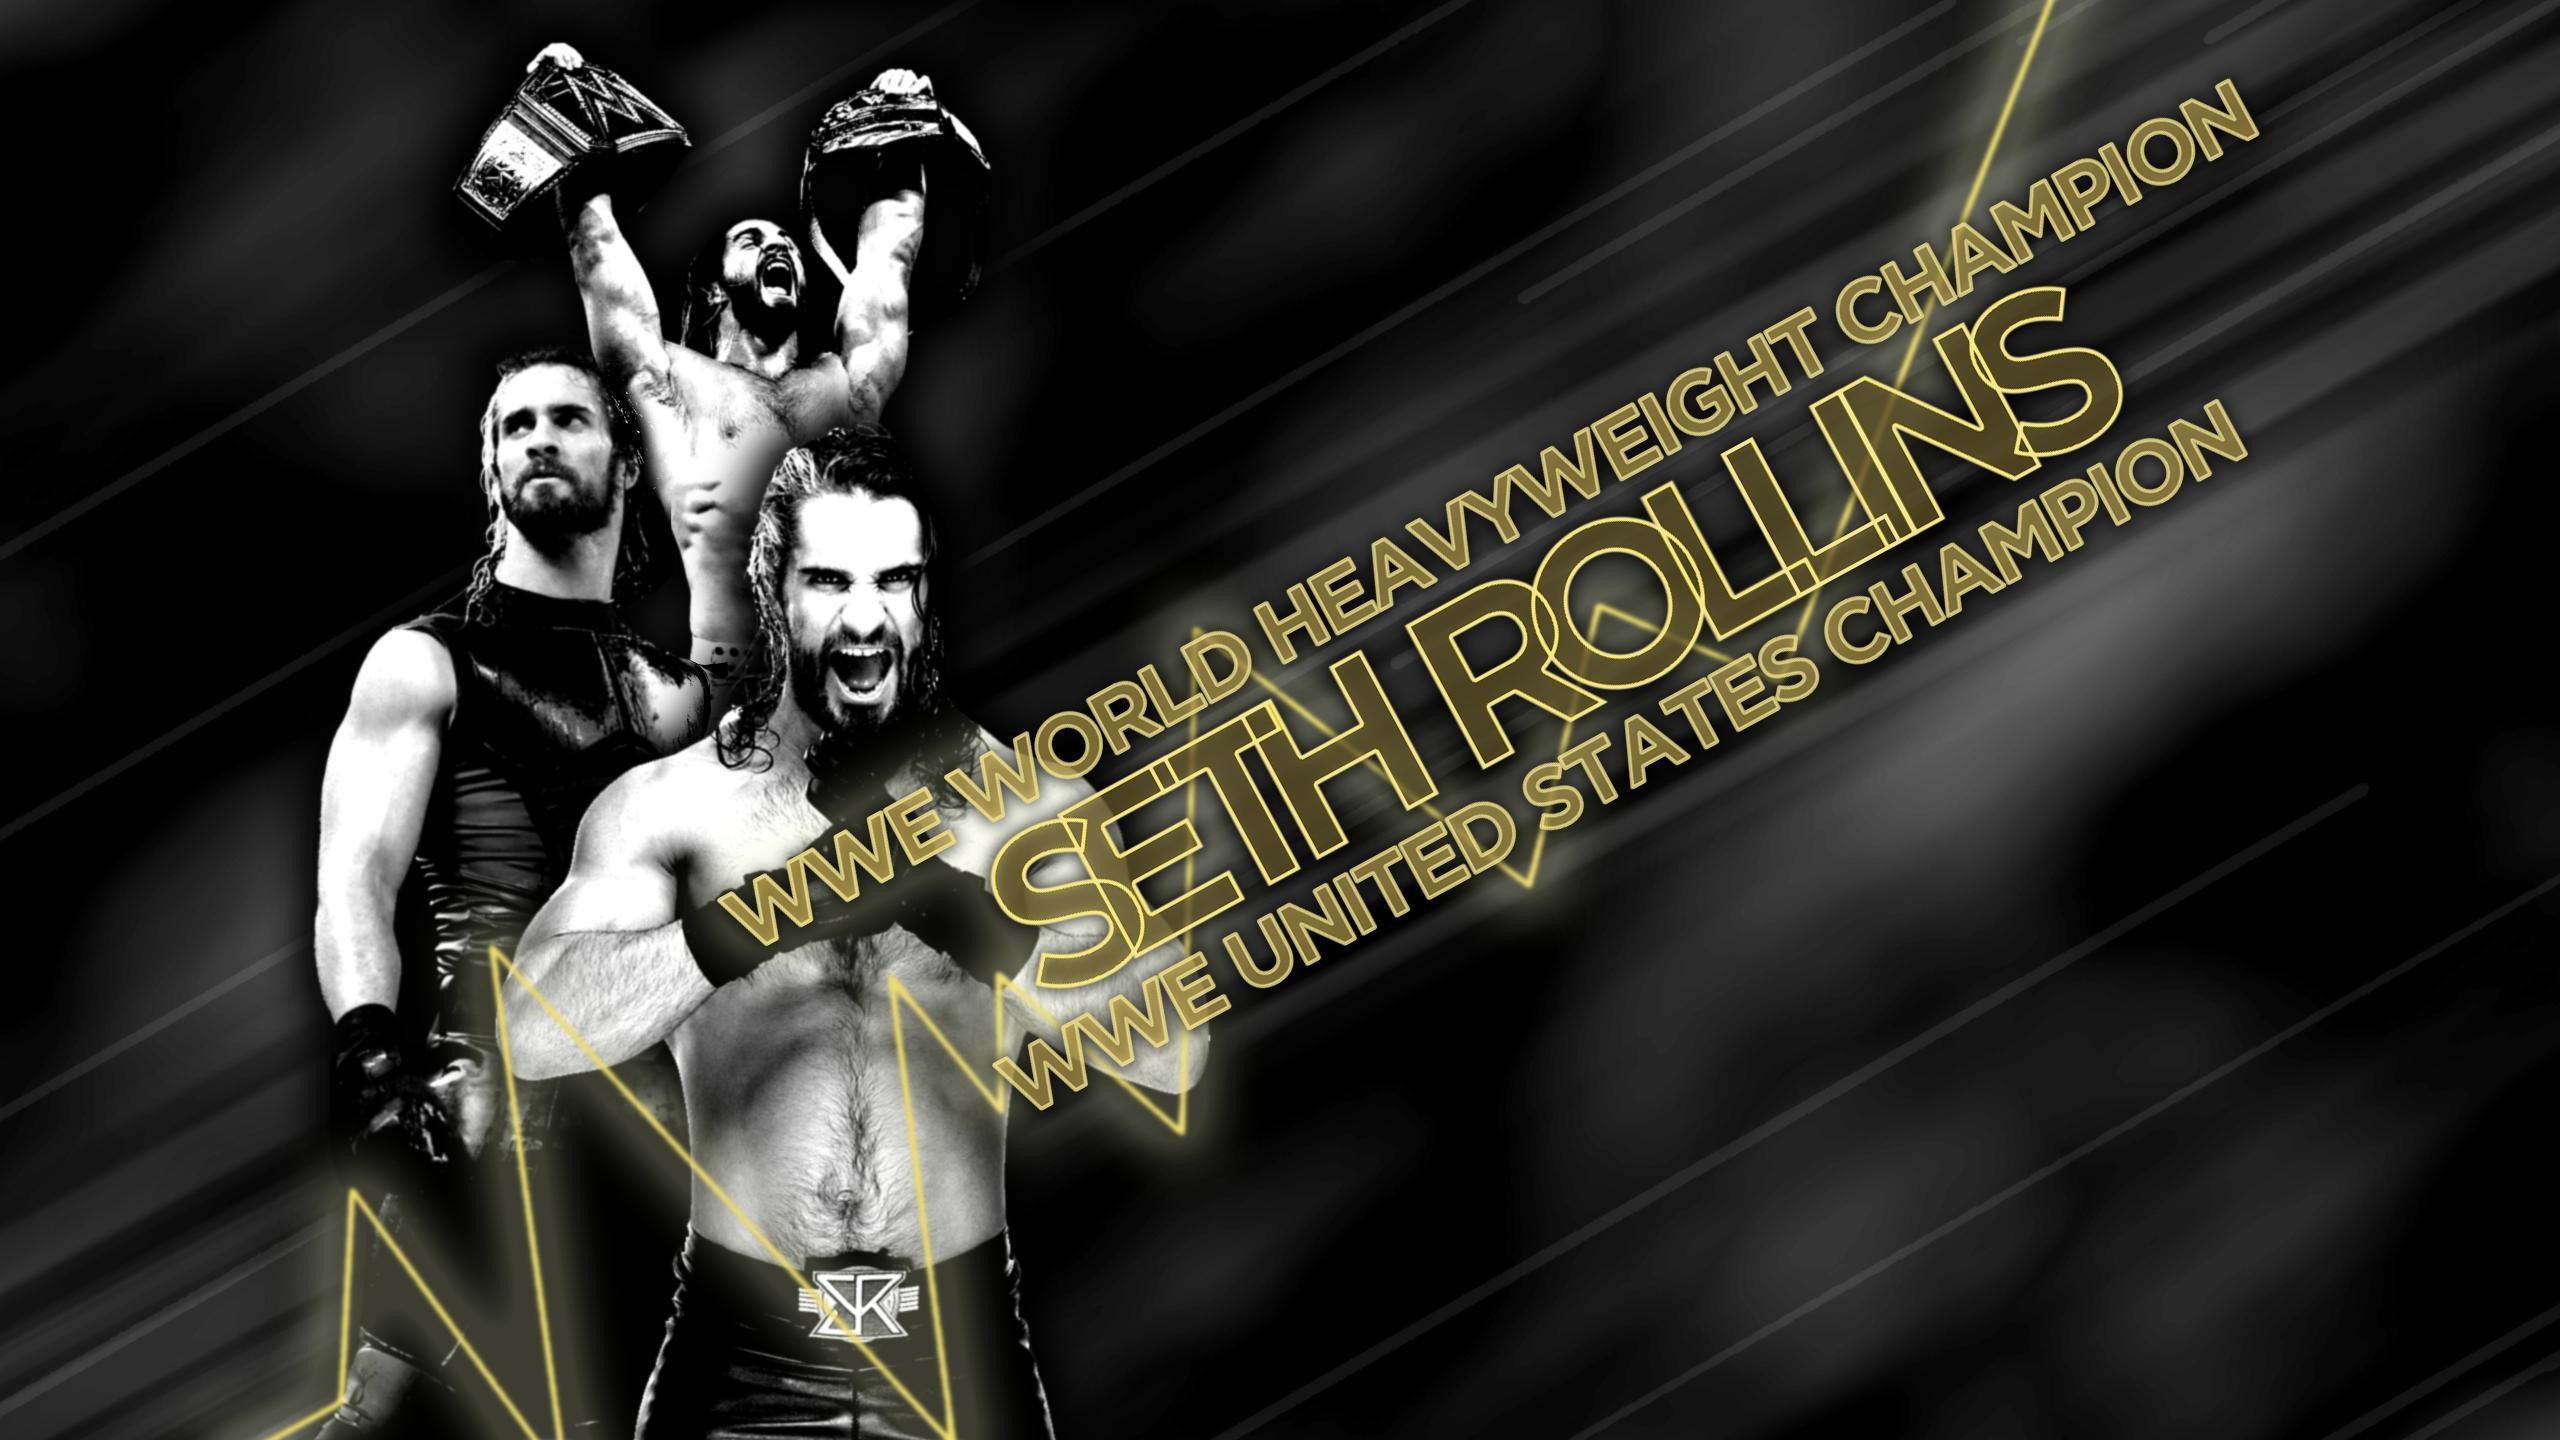 I Made Myself A Seth Rollins Wallpaper For My Computer And Thought With The Rollins Love In About To Peak Sunday Night With His Double Retention 2560x1440